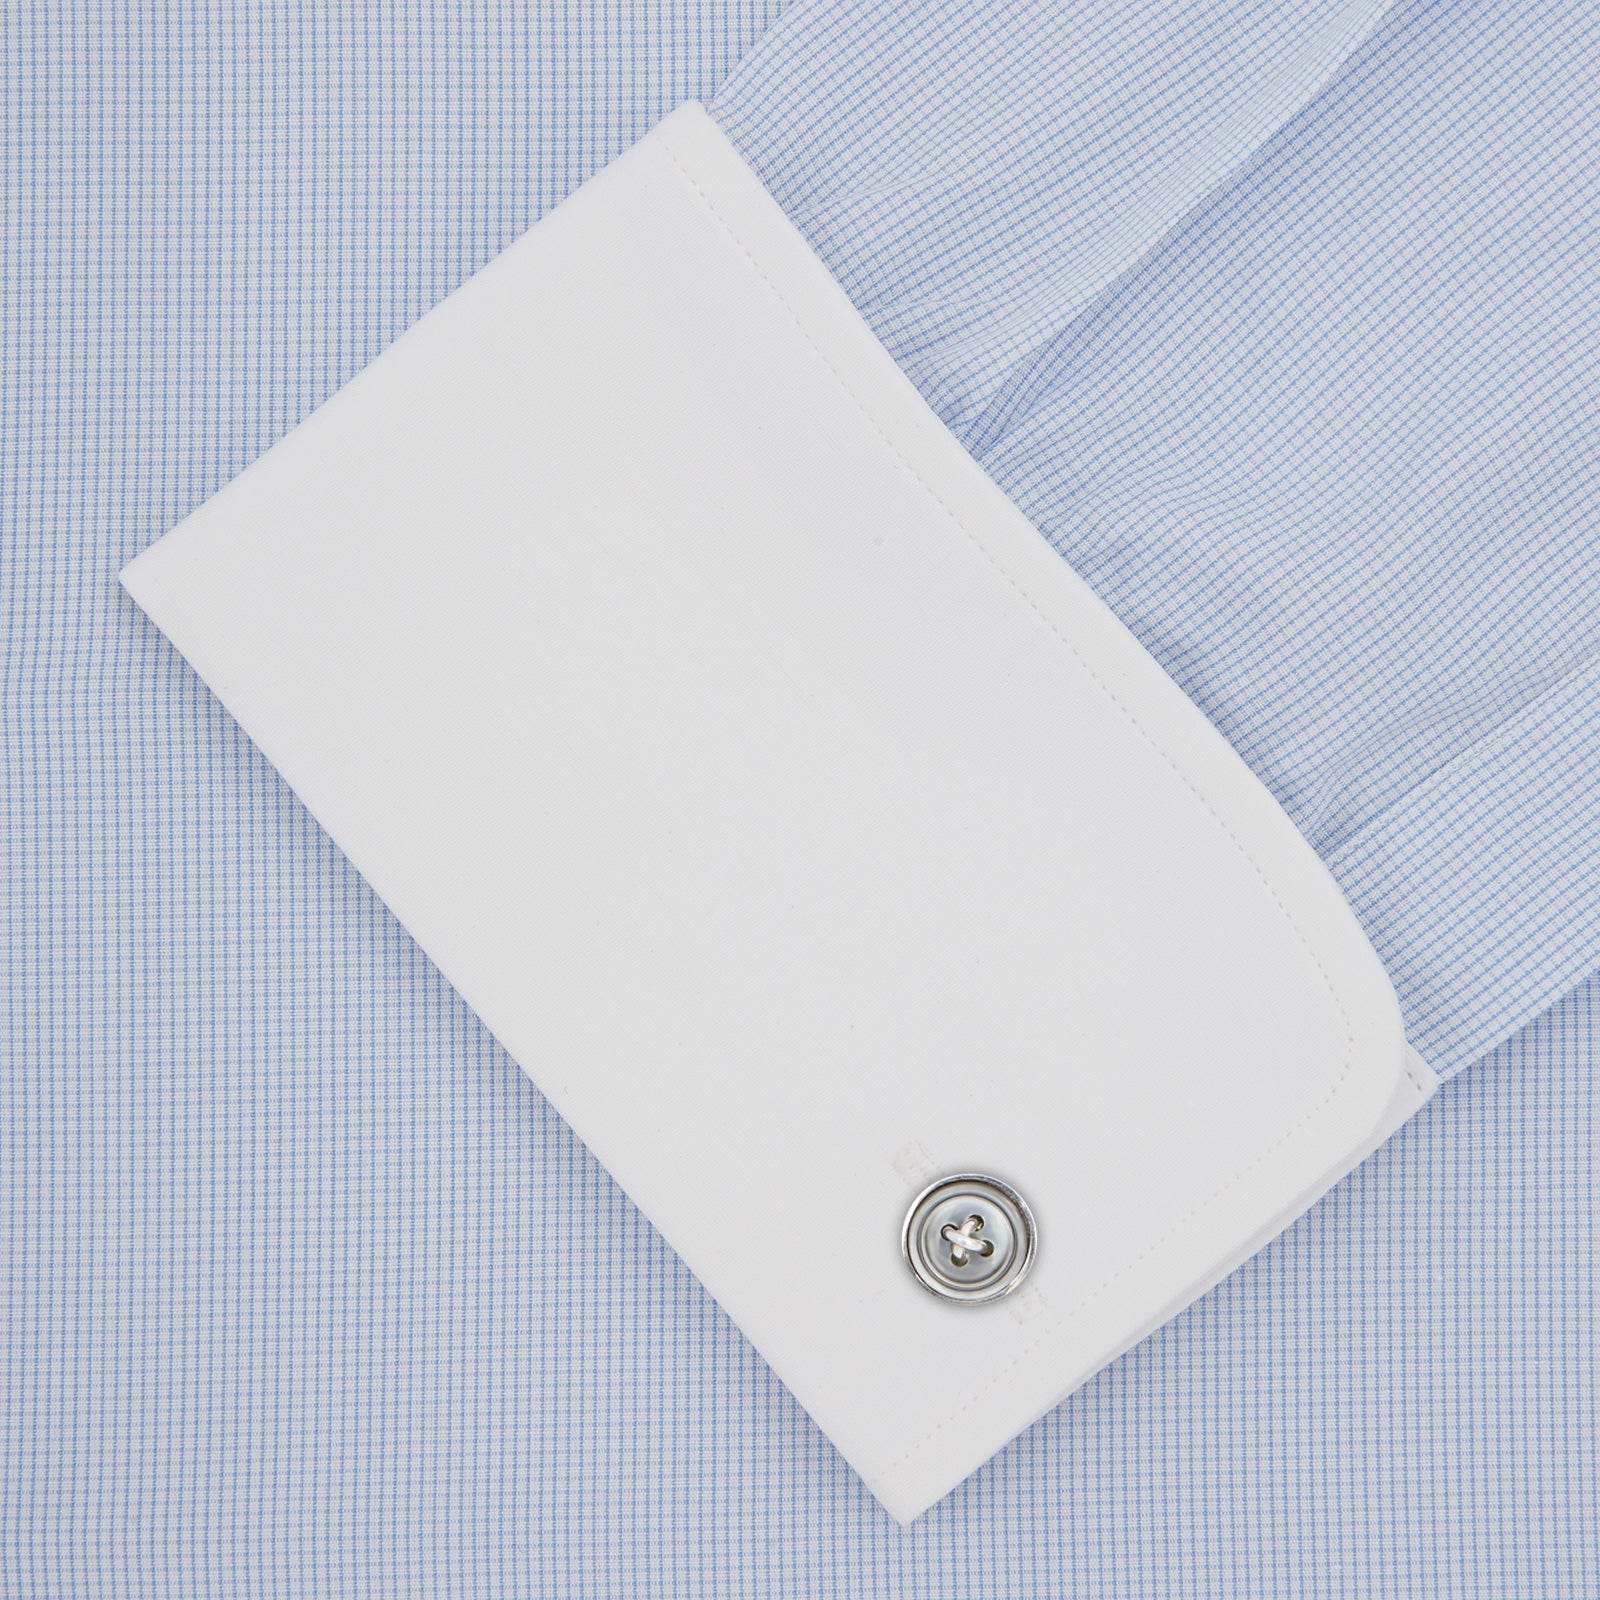 The Great Gatsby Cotton Shirt with White Collar and Double Cuffs